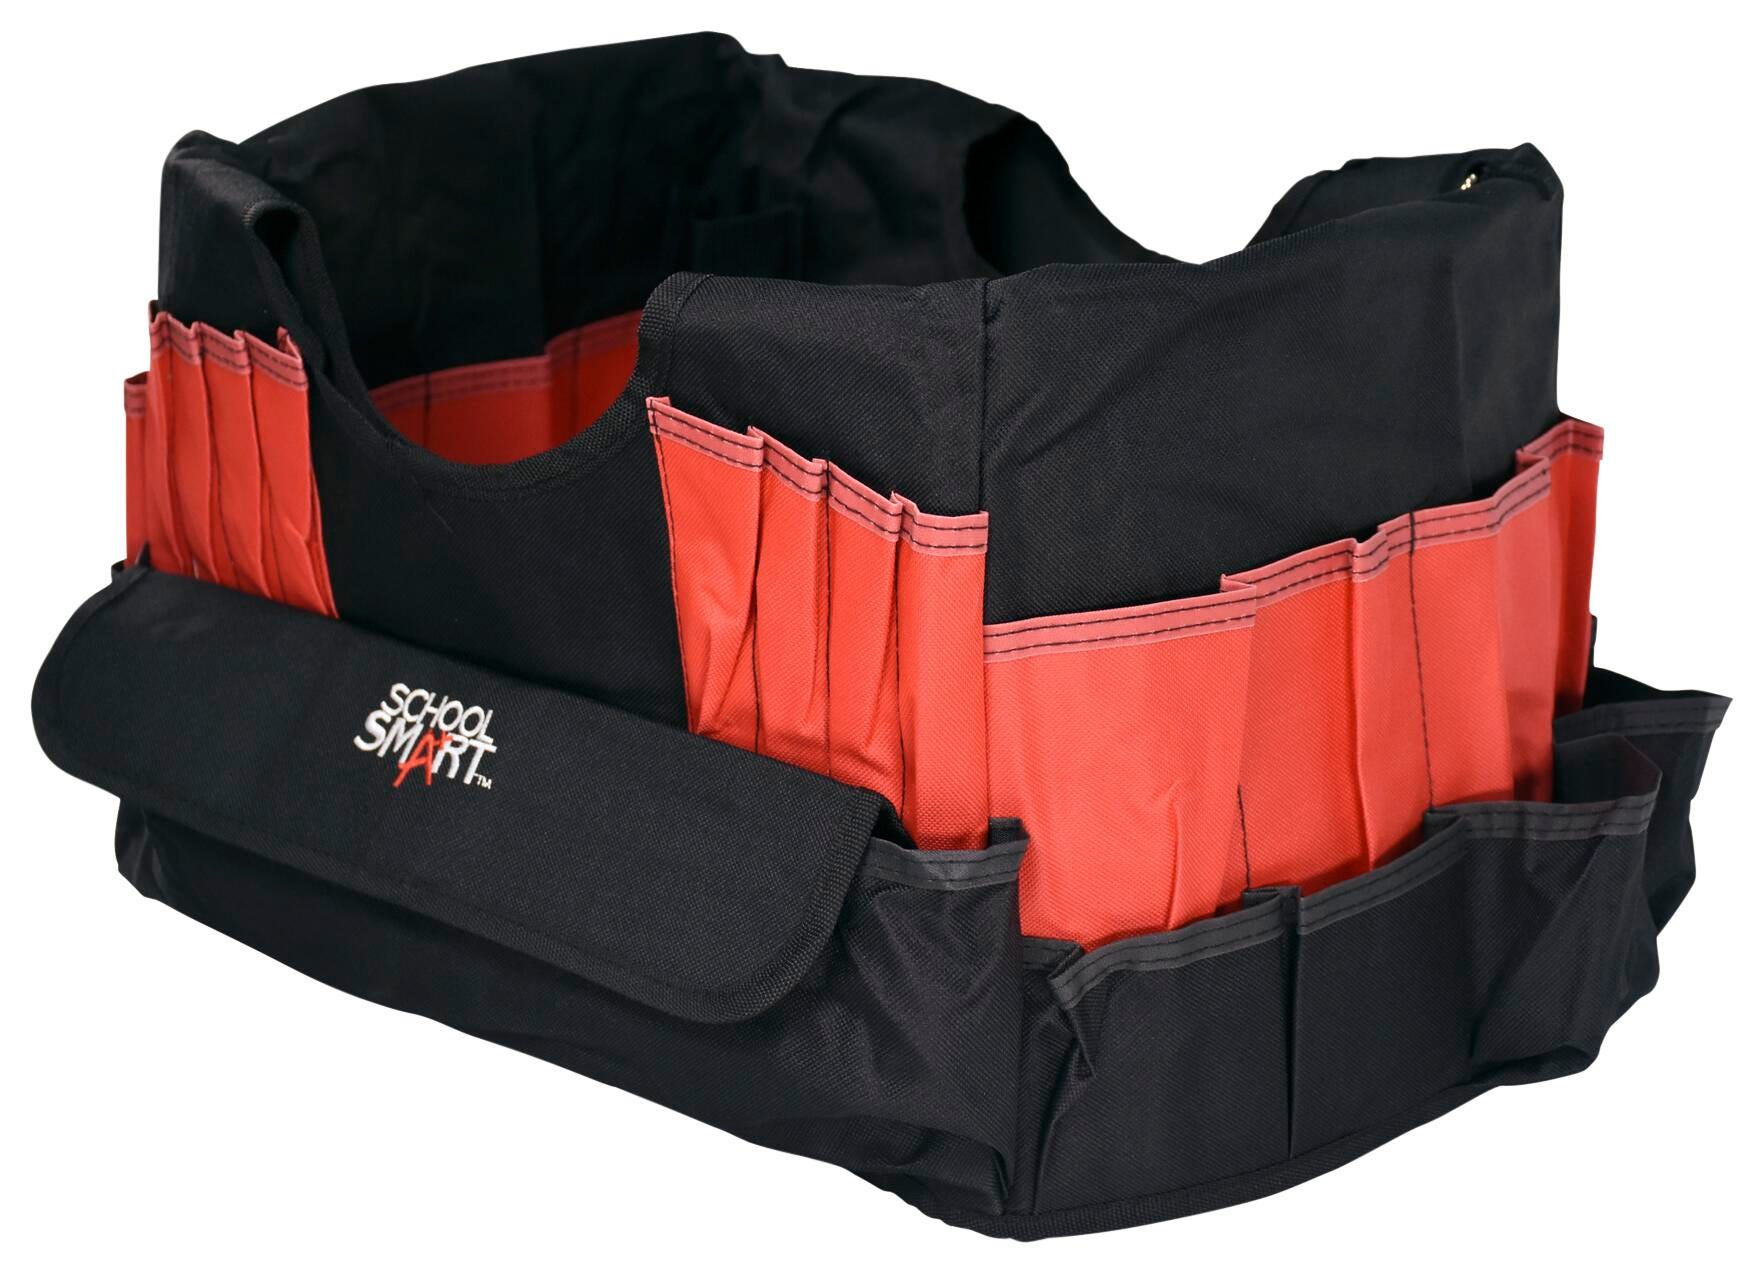 School Smart Caddy Organizer with 43 Pockets, Medium, 14 x 12 x 12 Inches, Black/Red - image 3 of 7